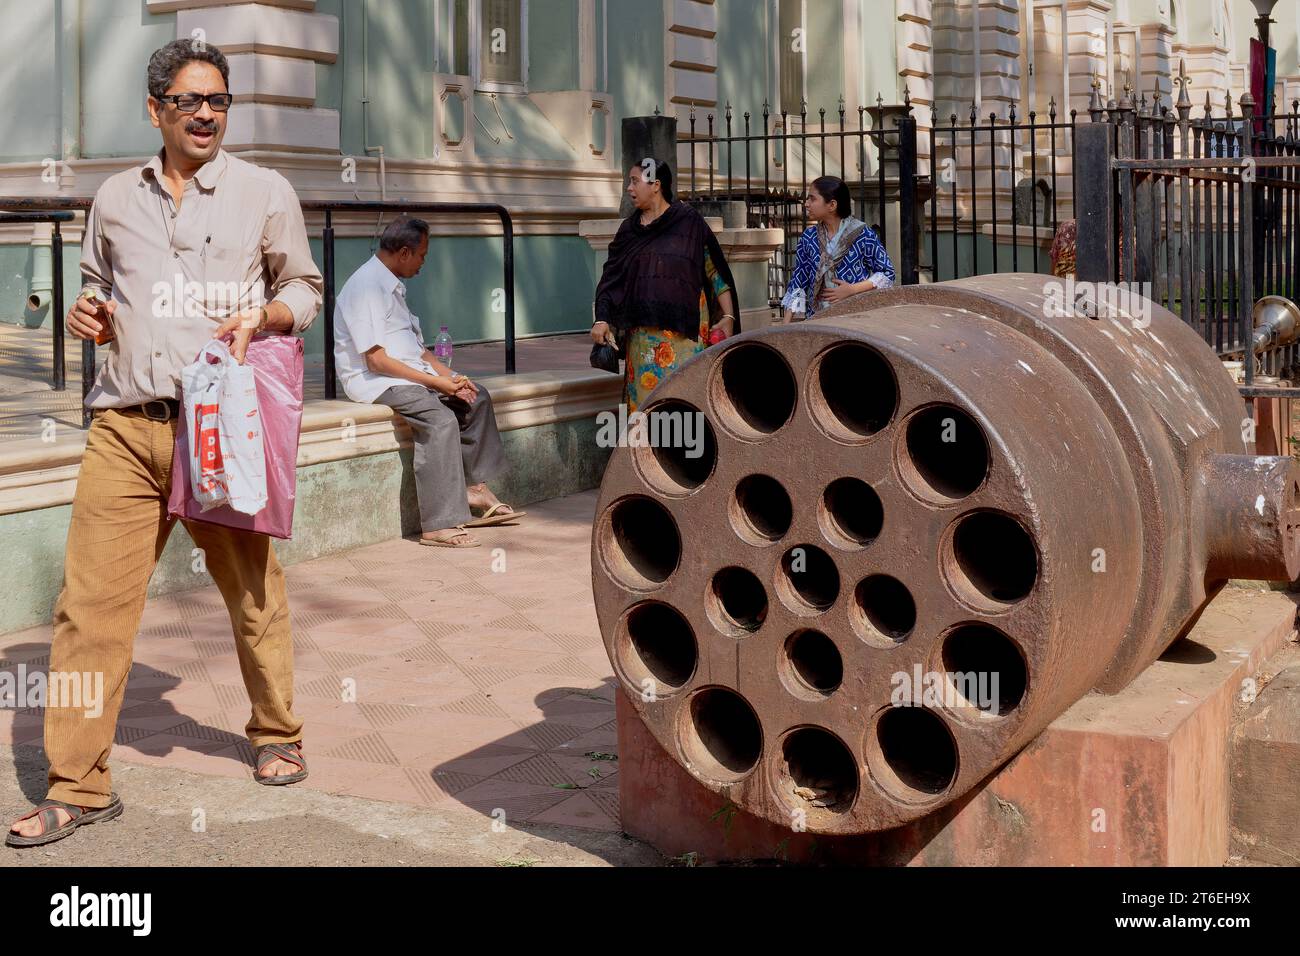 Visitors to Dr. Bhau Daji Lad Museum in Byculla, Mumbai, India, next to a large multi-barrel cannon from the Mughal era placed outside of the museum Stock Photo